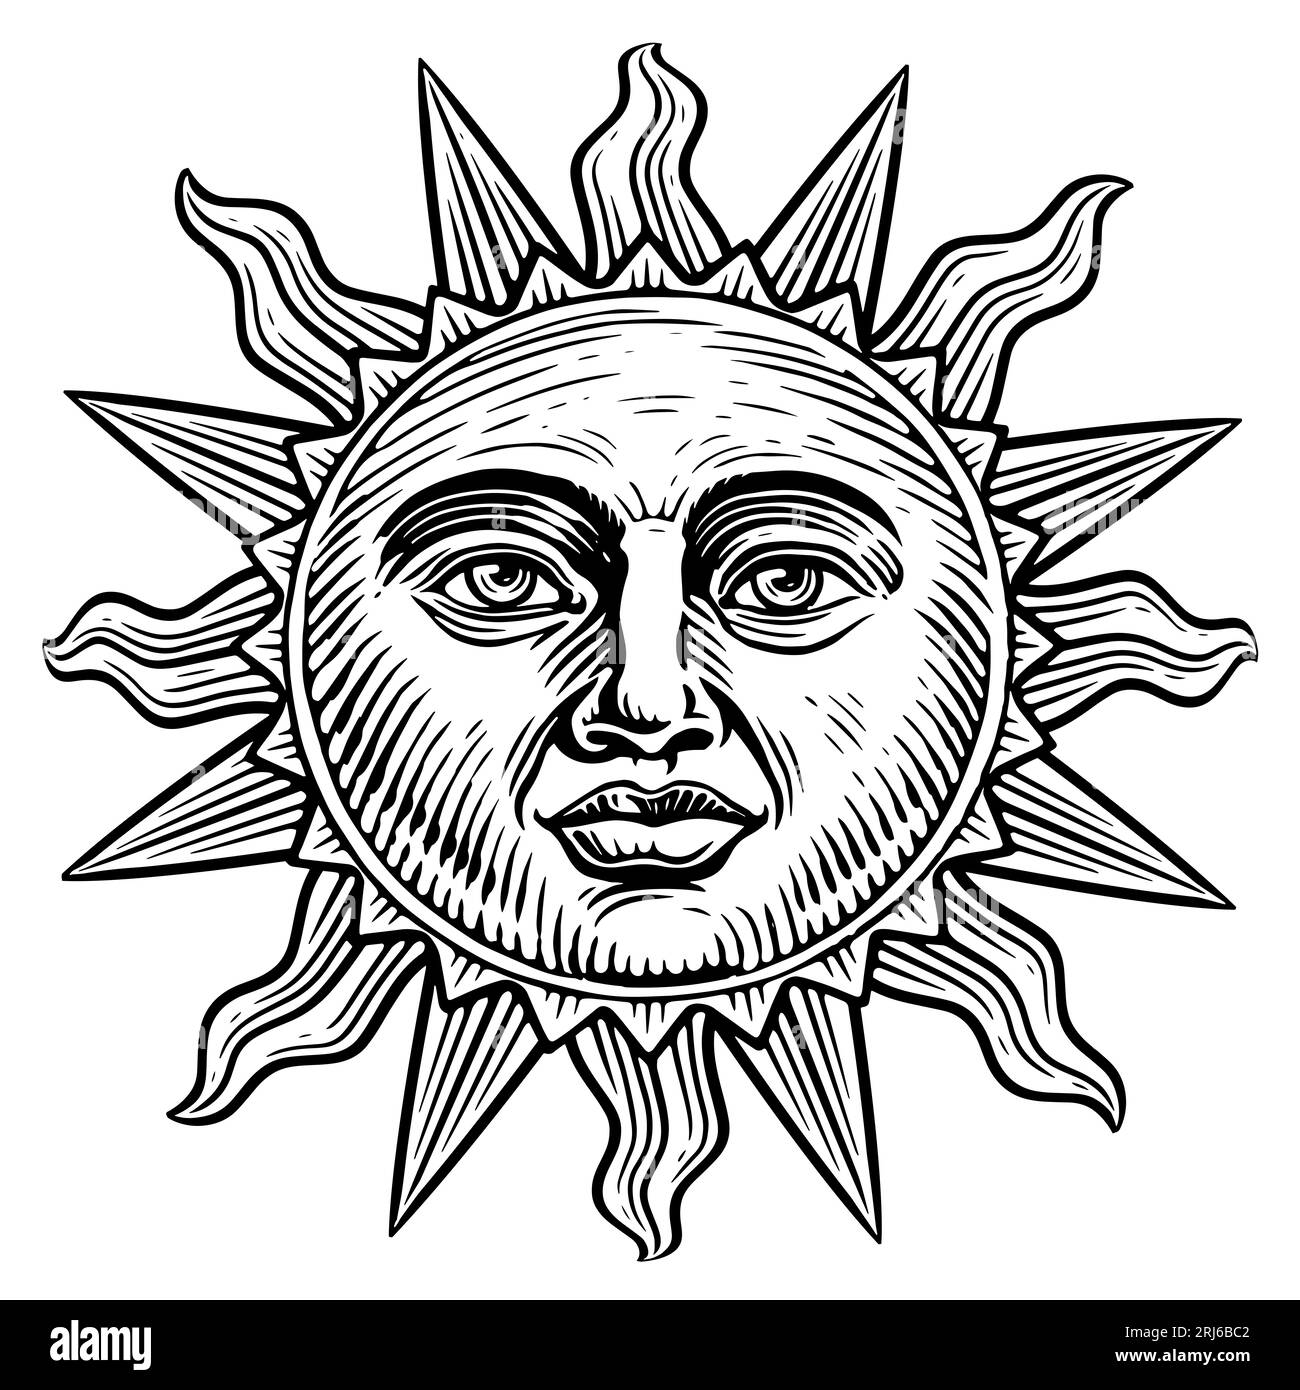 Sun with face sketch. Astrology symbol. Esoteric and occult magic sign. Engraving vintage illustration Stock Photo